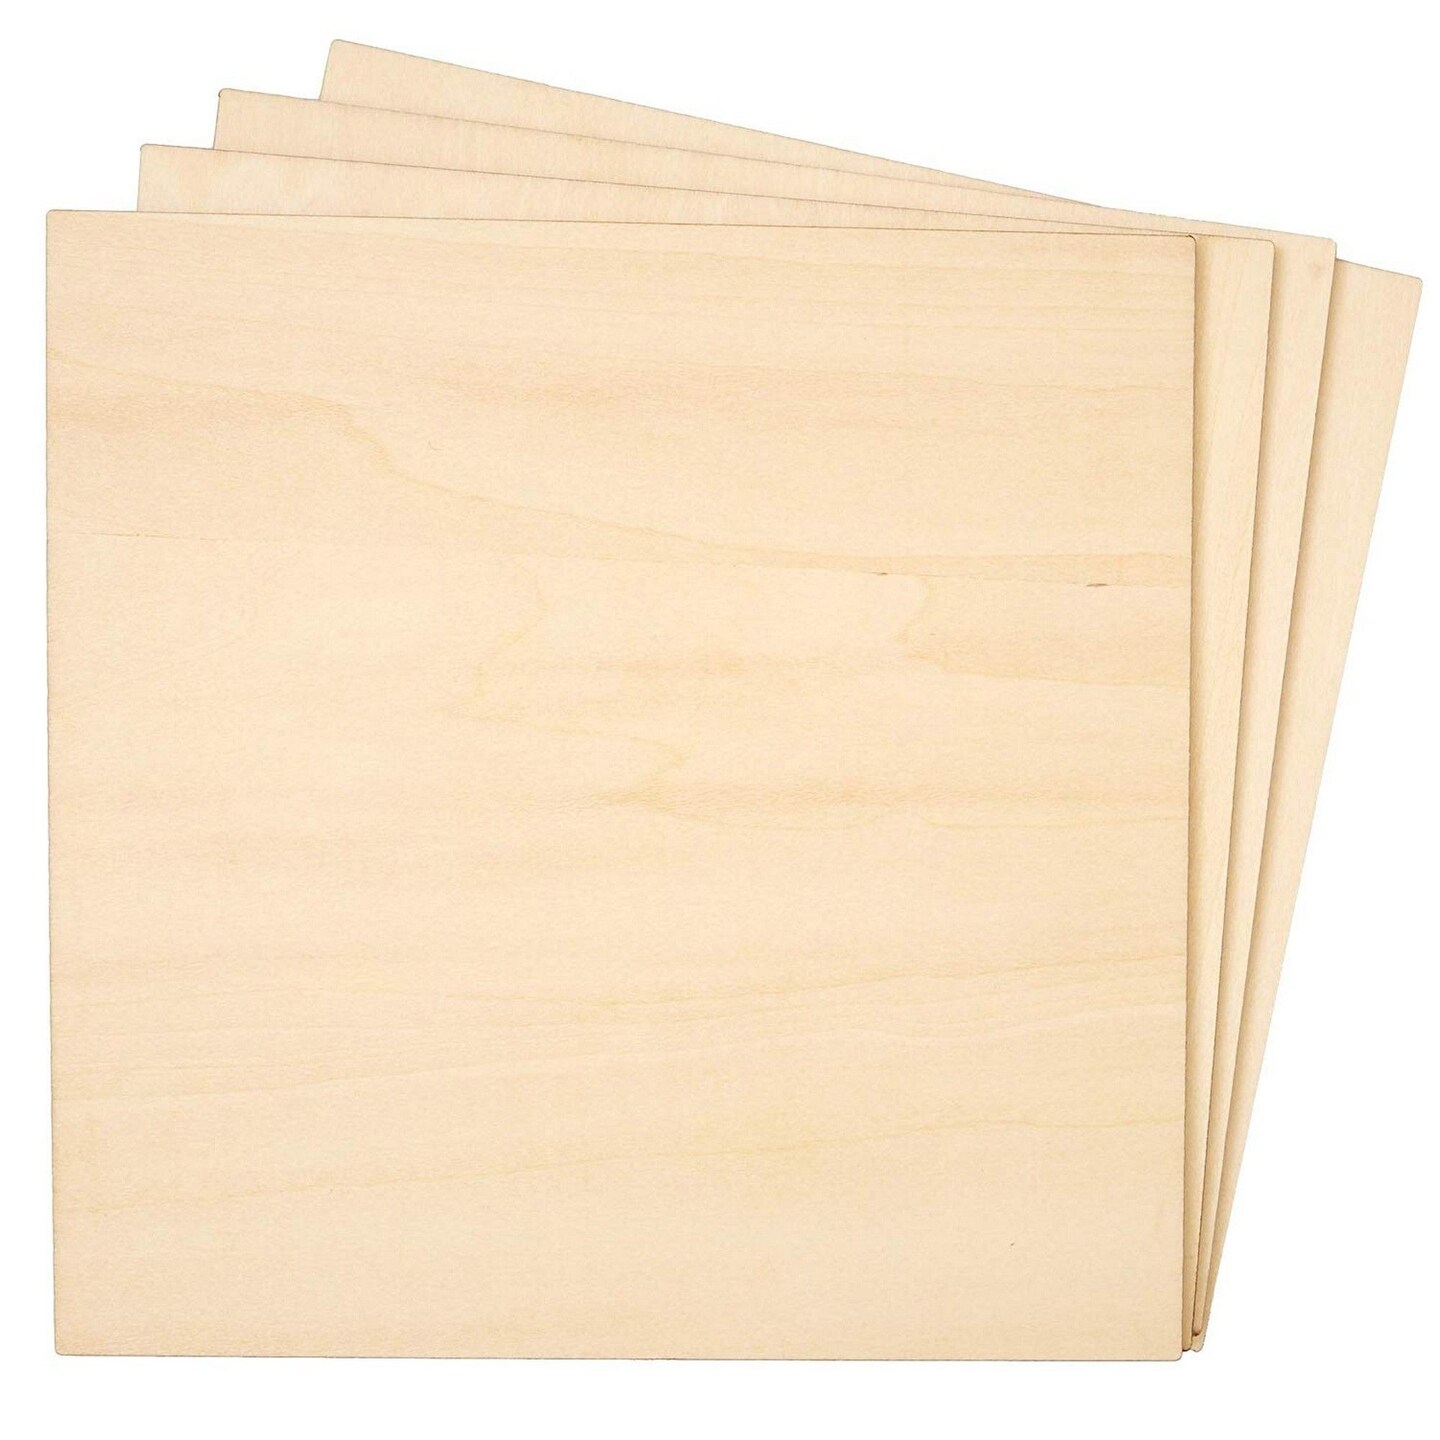 8 Pack Thin 8x8 Wood Squares for DIY Crafts, Unfinished 1/4 Inch Basswood  Plywood for Laser Cutting, Wood Burning